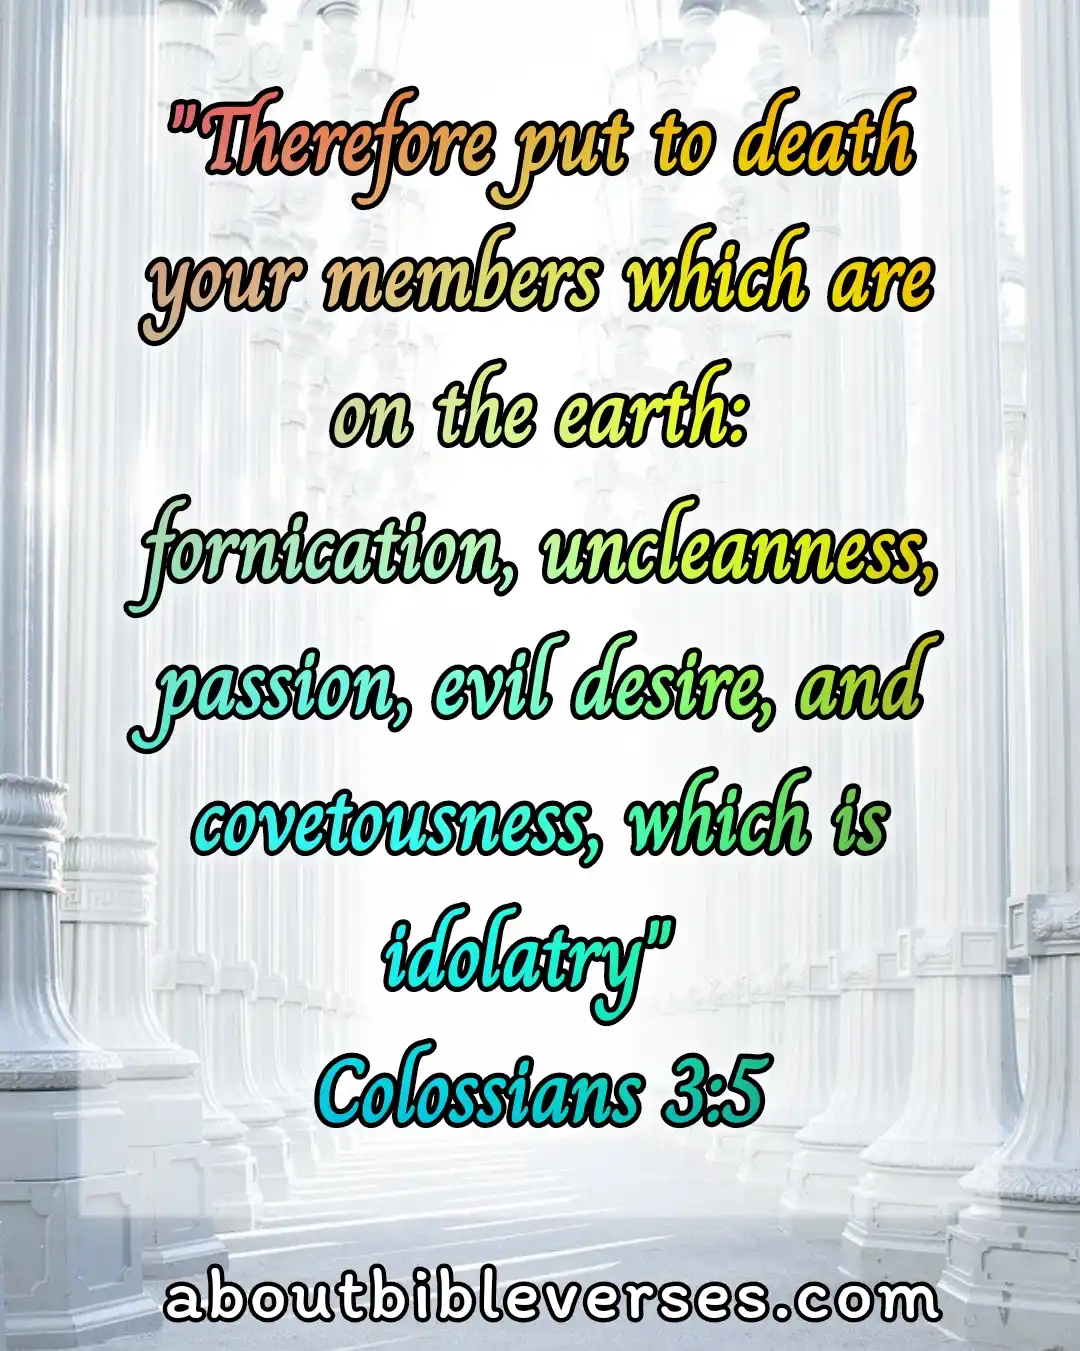 Applying Scripture To Everyday Life (Colossians 3:5)